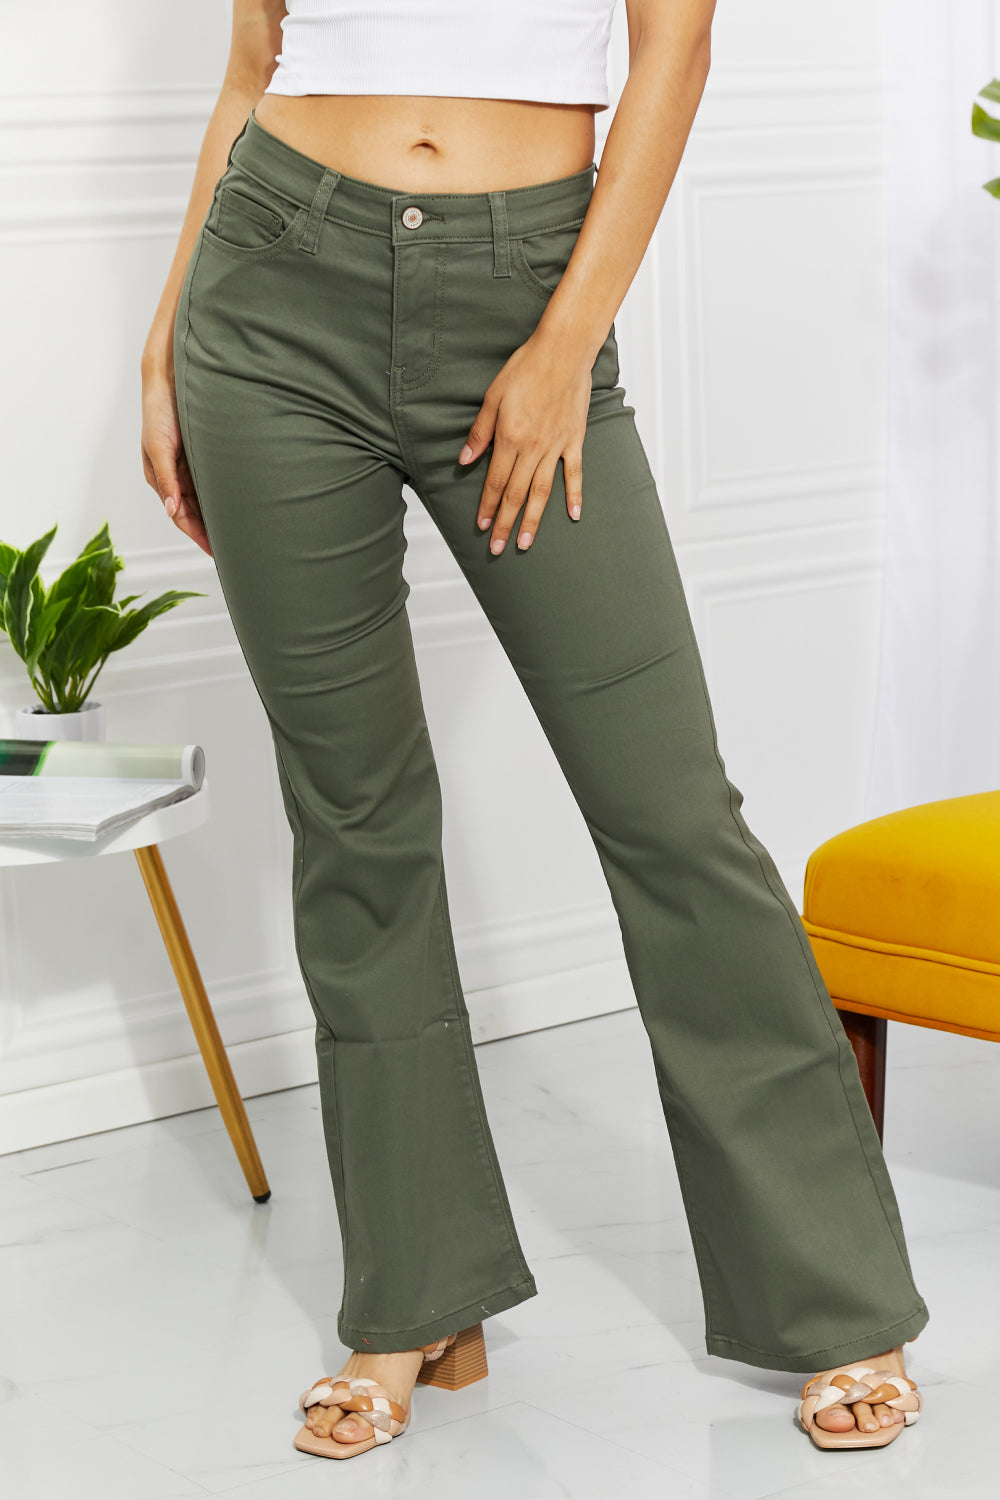 Zenana Clementine Full Size High-Rise Bootcut Jeans in Olive Print on any thing USA/STOD clothes